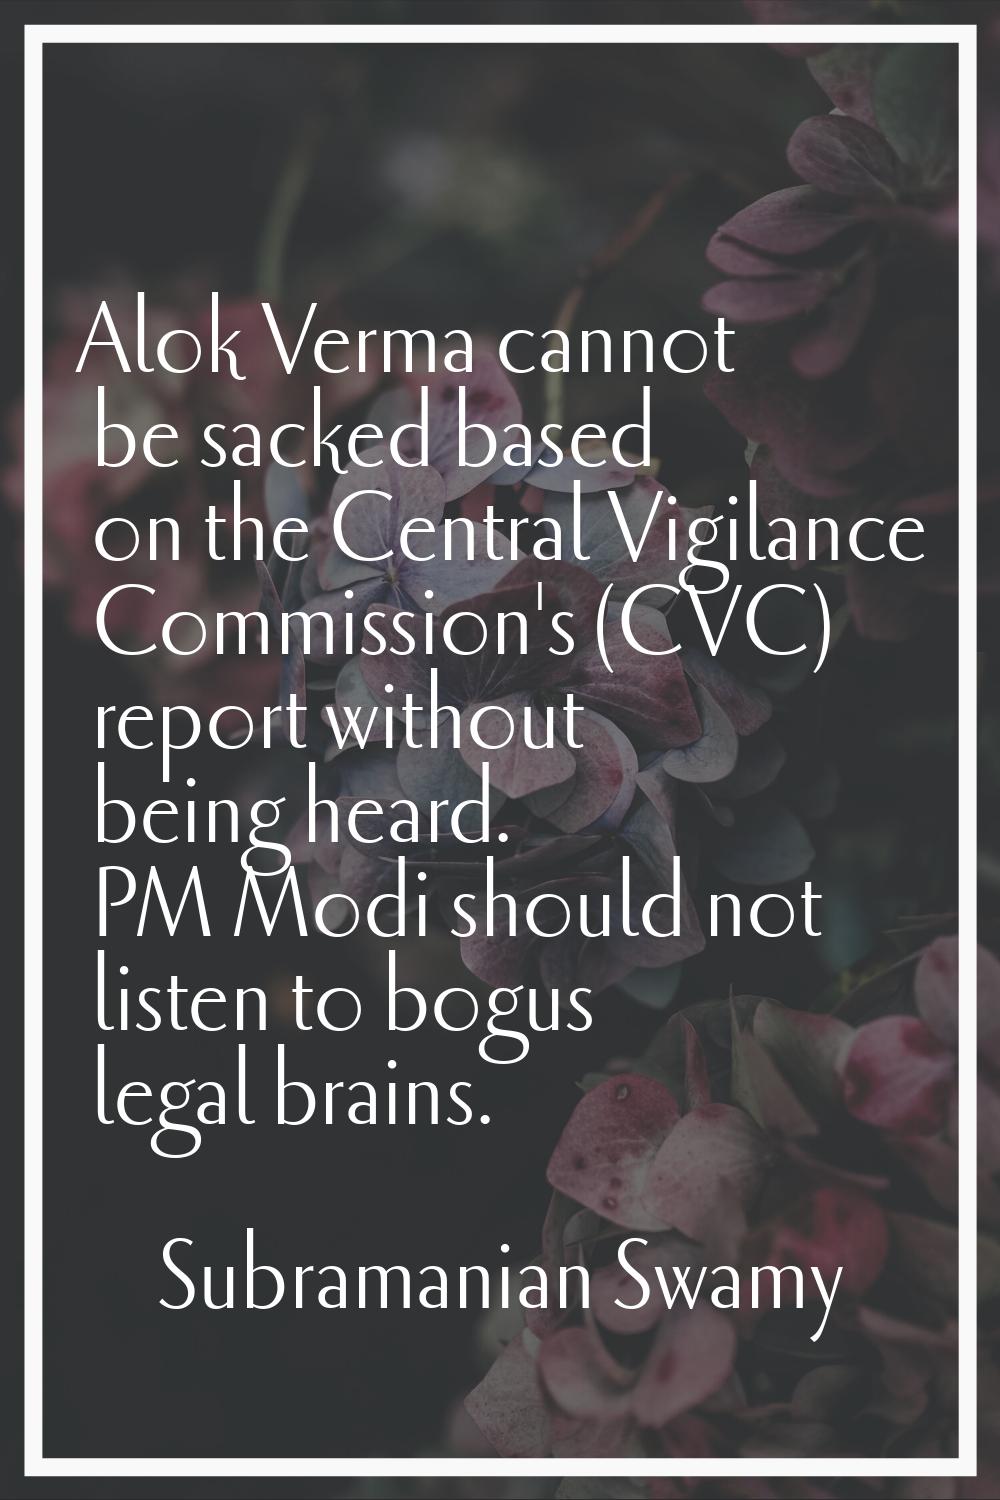 Alok Verma cannot be sacked based on the Central Vigilance Commission's (CVC) report without being 